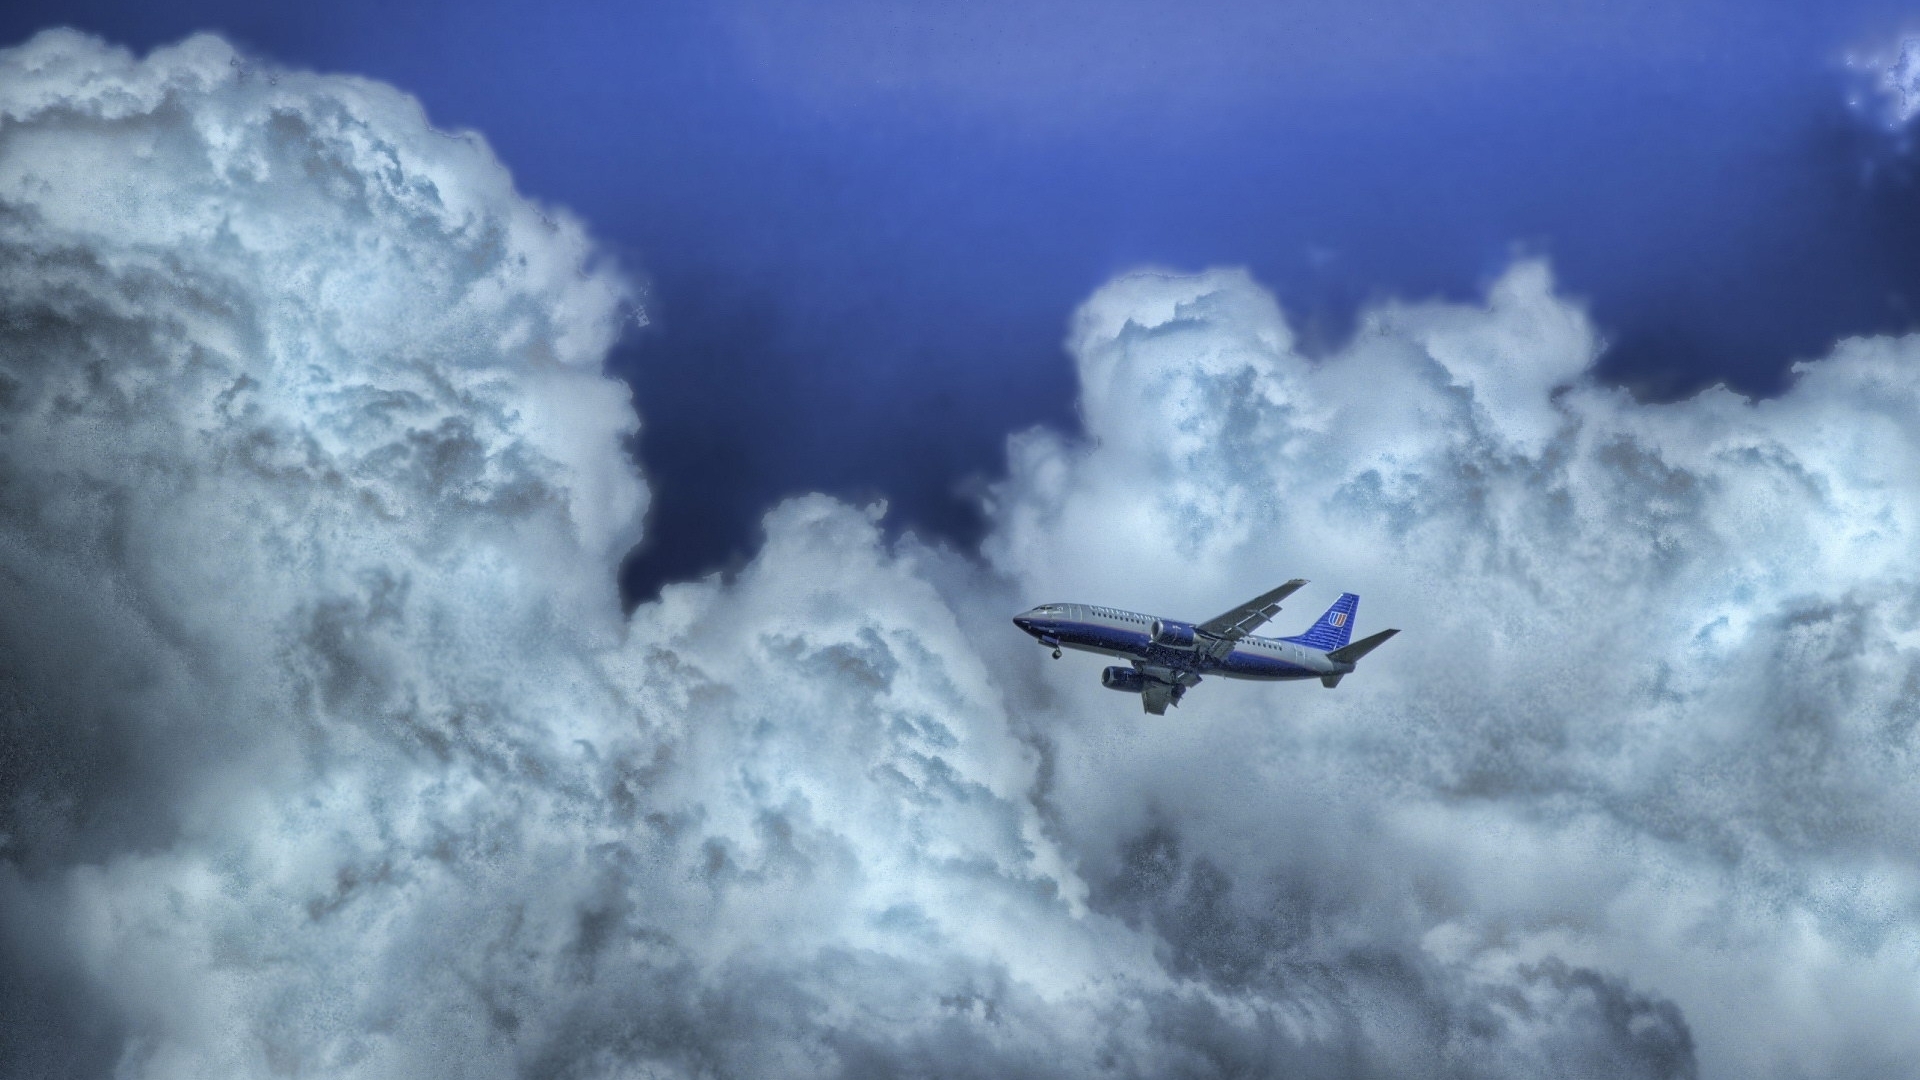 New Lock Screen Wallpapers transport, sky, clouds, airplanes, blue